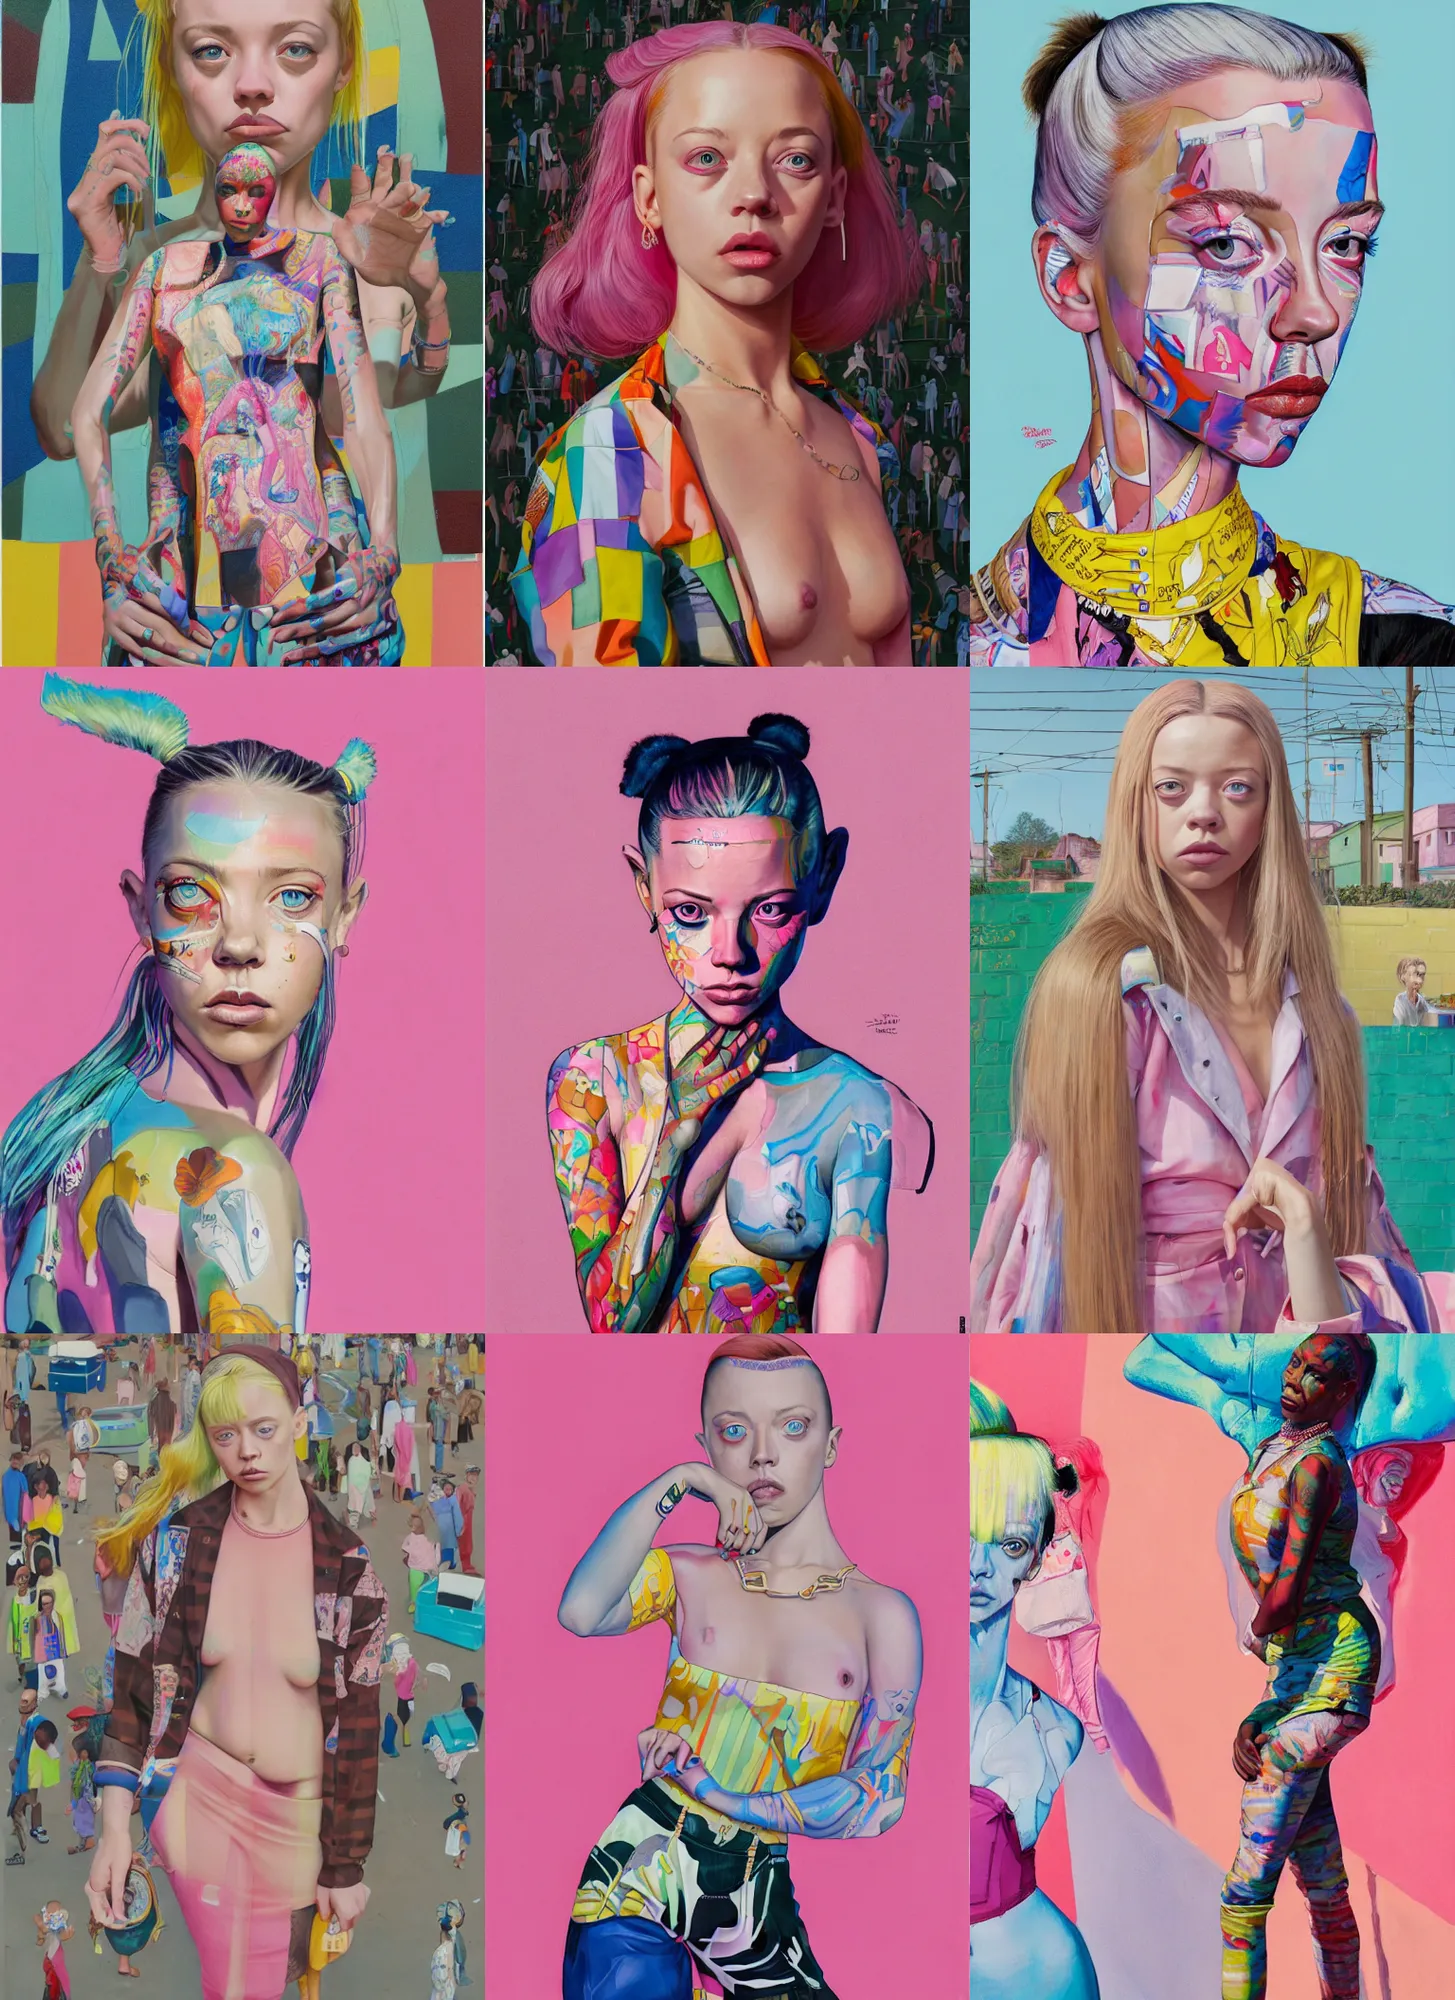 Prompt: still from music video of sydney sweeney from die antwoord standing in a township street, street fashion clothes, haute couture, full figure portrait painting by martine johanna, njideka akunyili crosby, rossdraws, pastel color palette, 2 4 mm lens